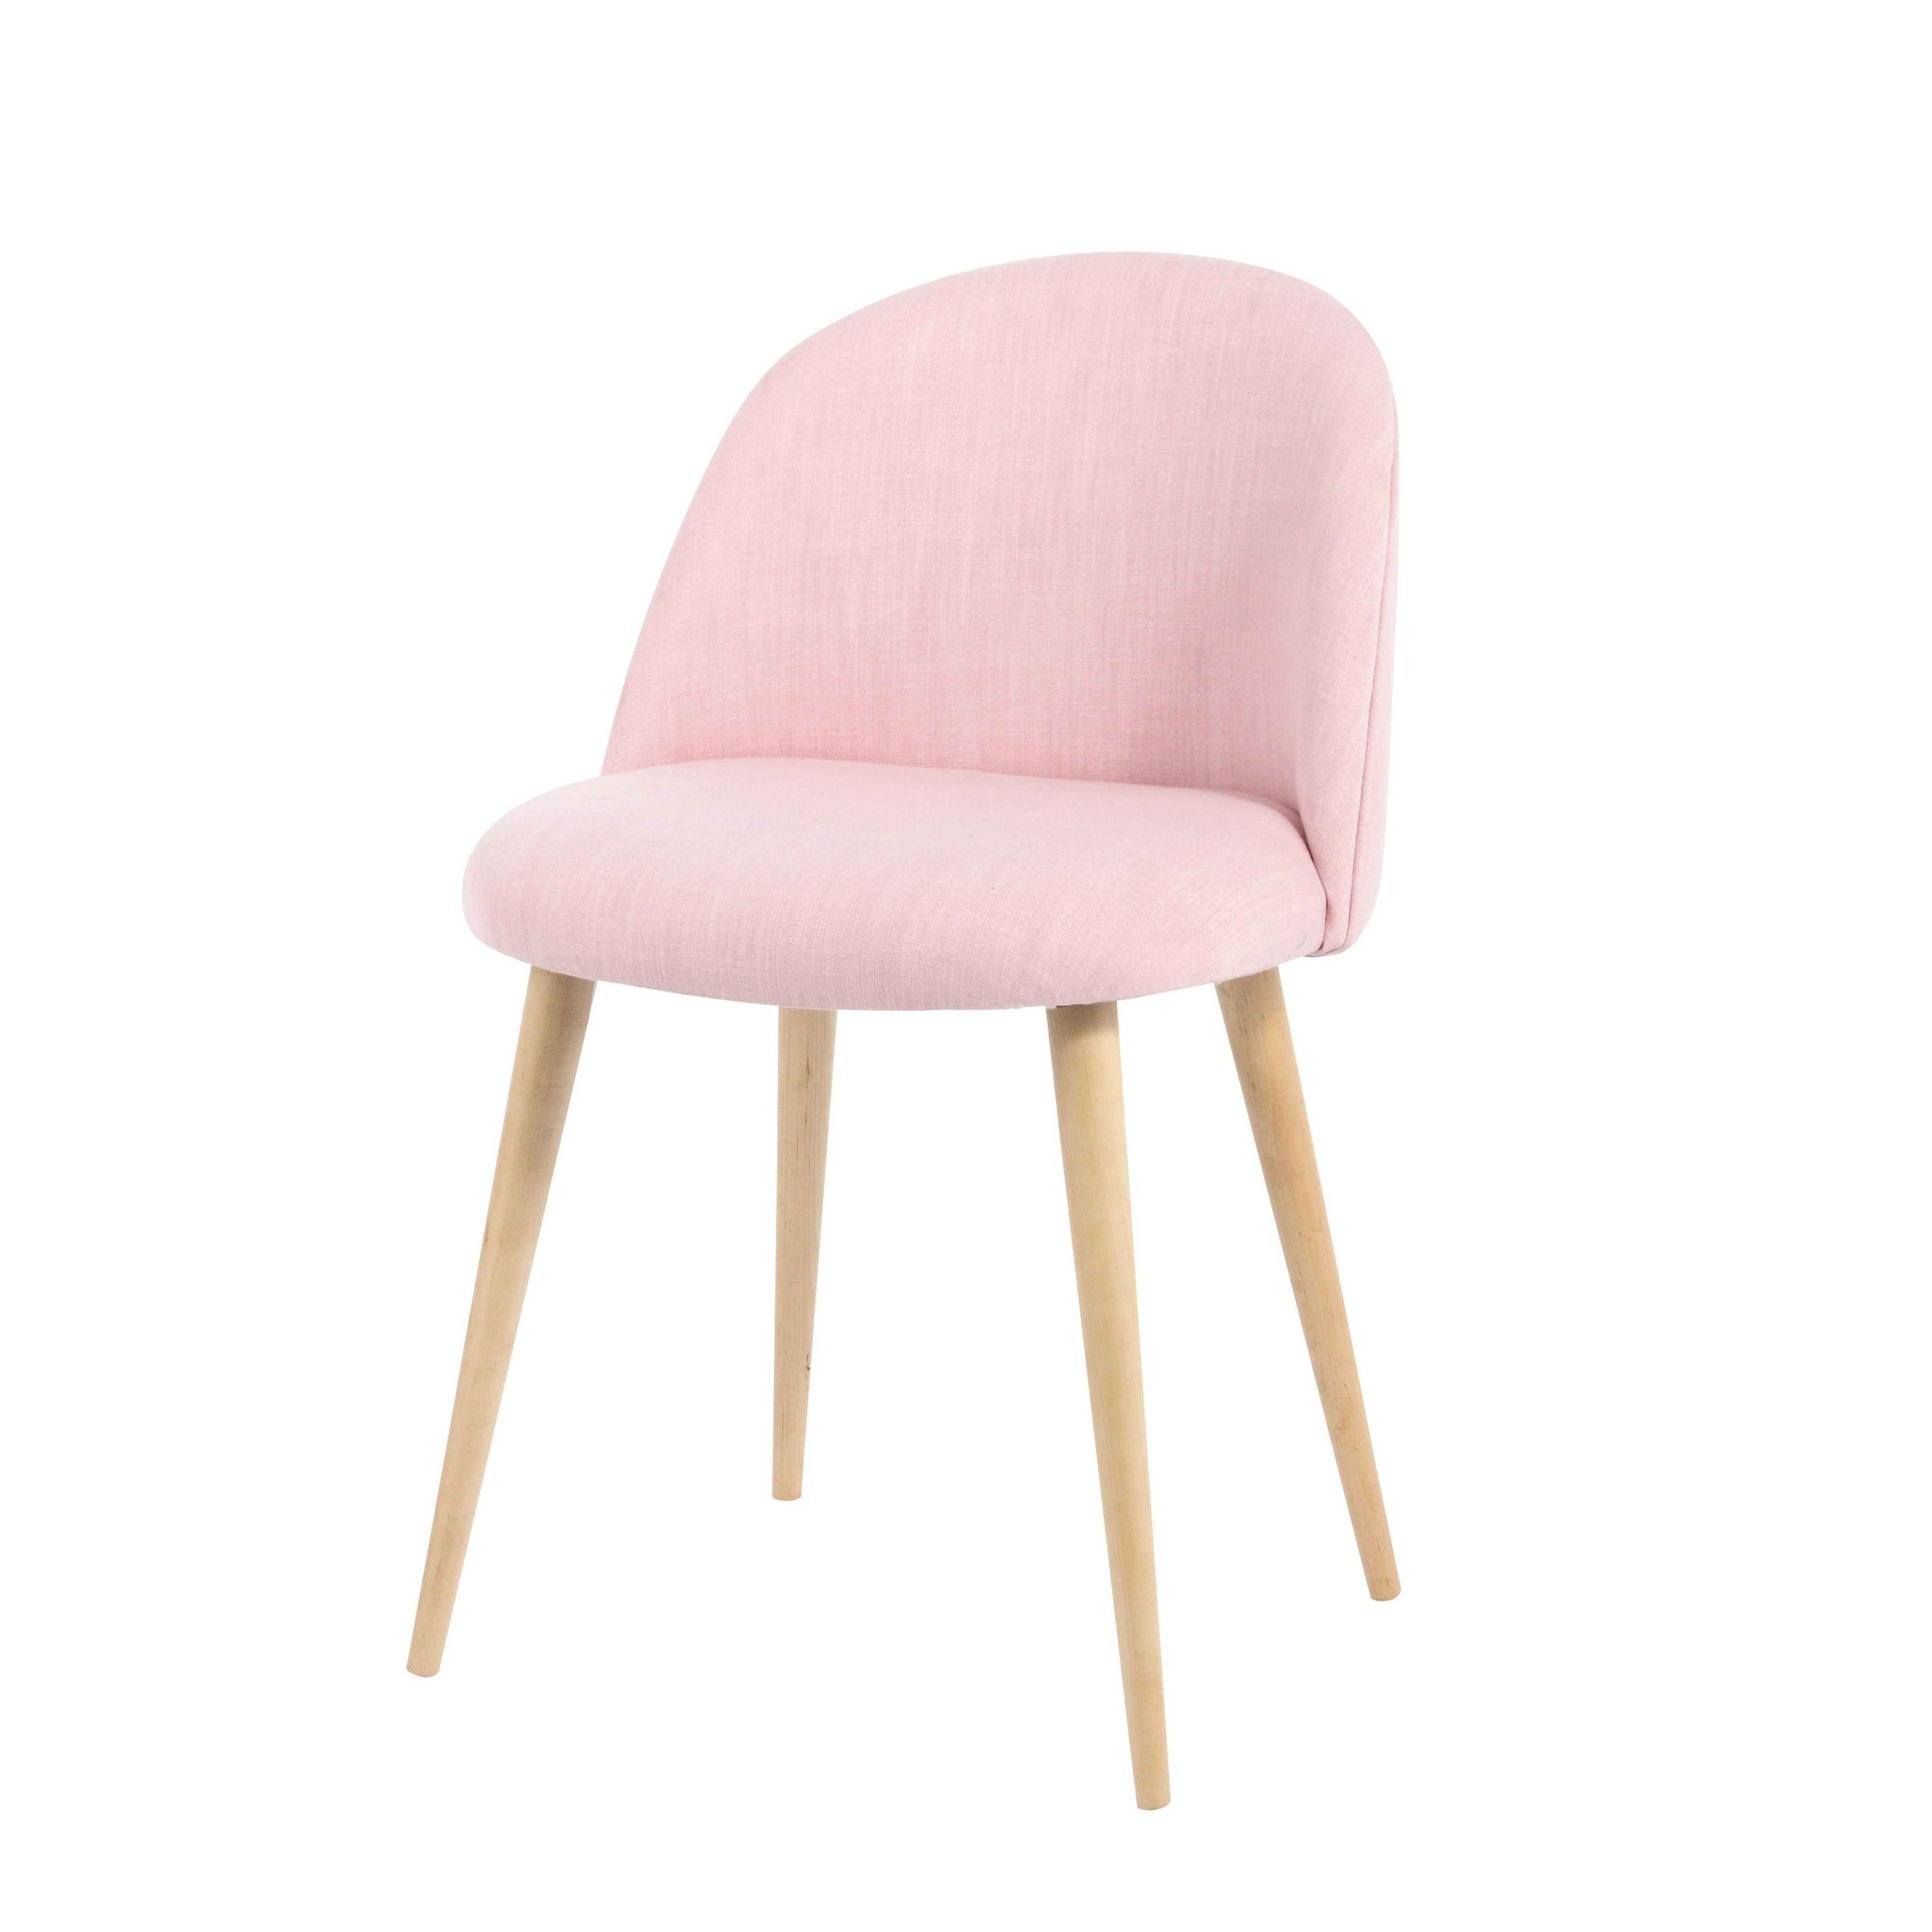 Chaise scandinave rose but